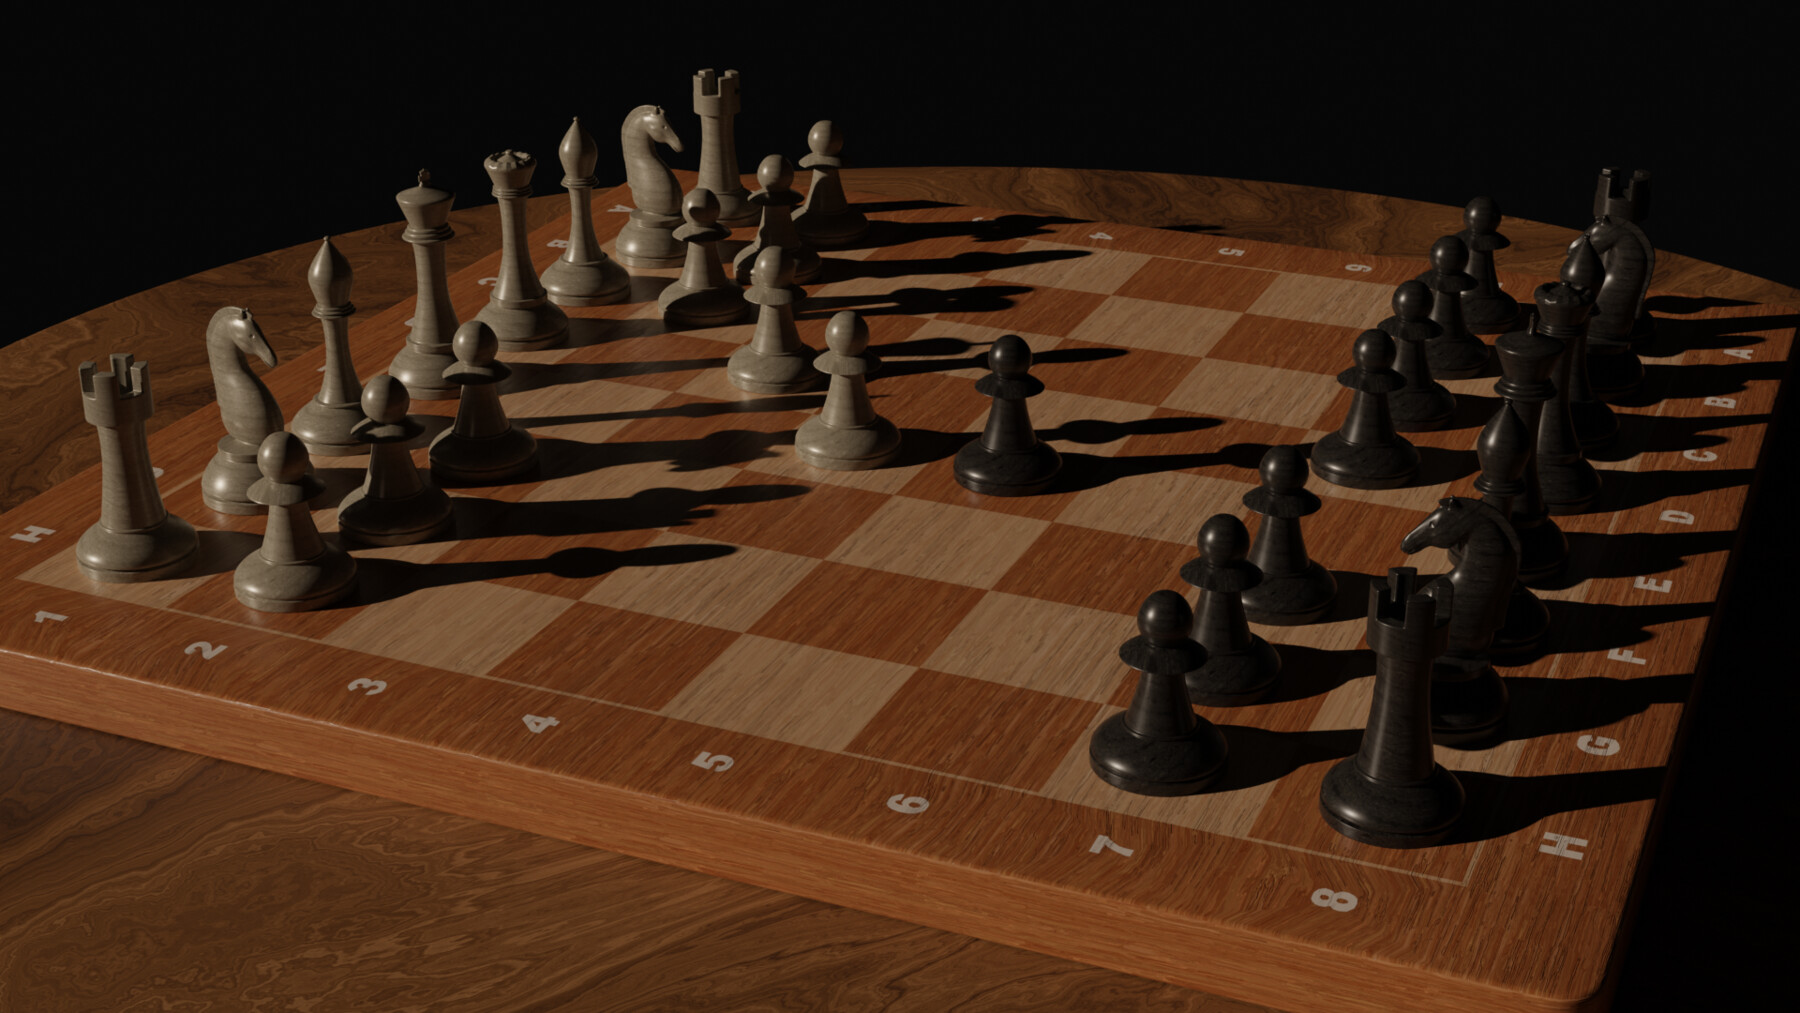 Chess Pieces & Board, 3D Props